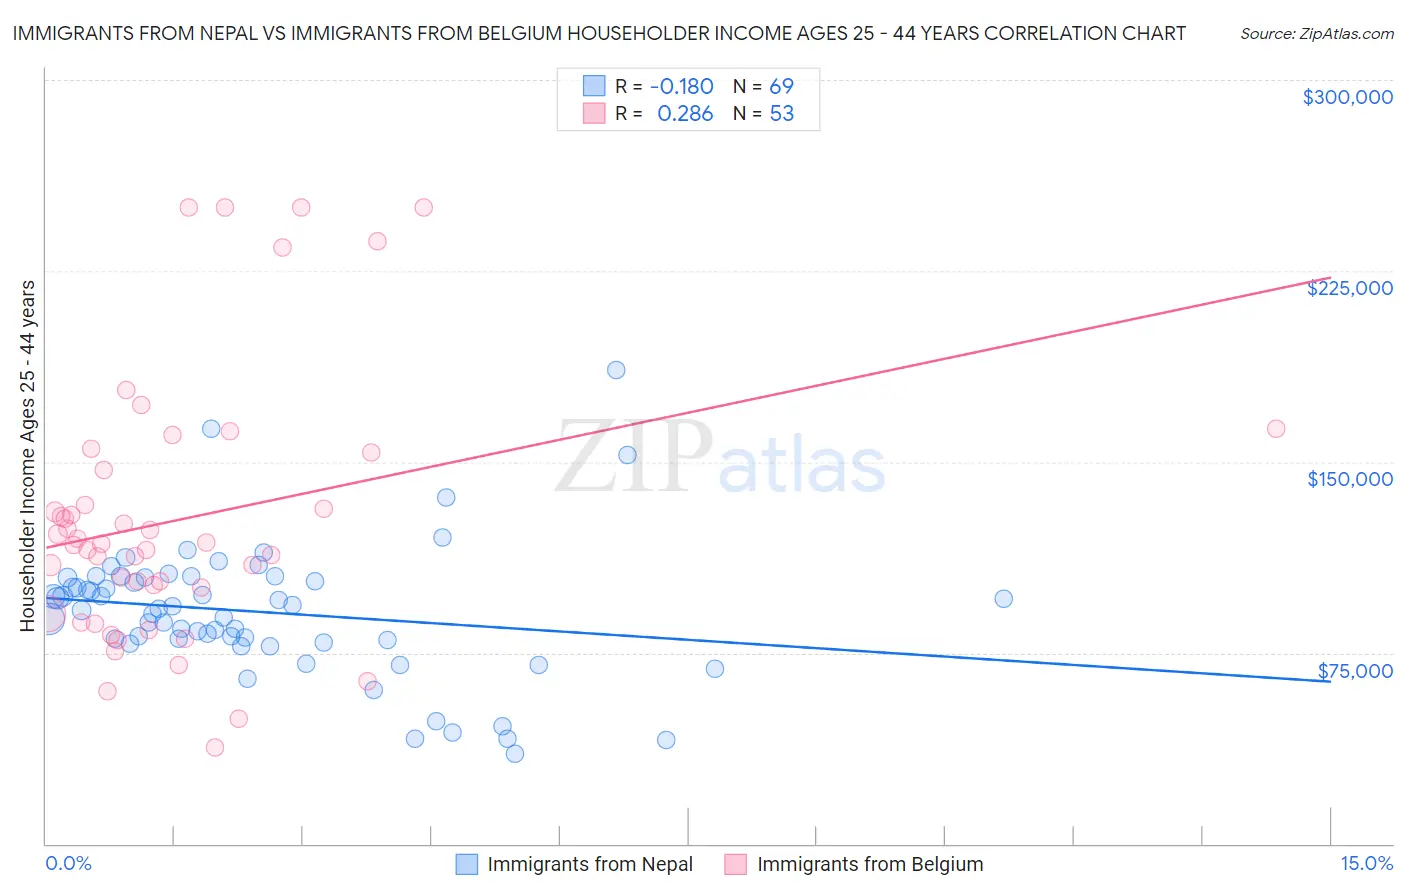 Immigrants from Nepal vs Immigrants from Belgium Householder Income Ages 25 - 44 years